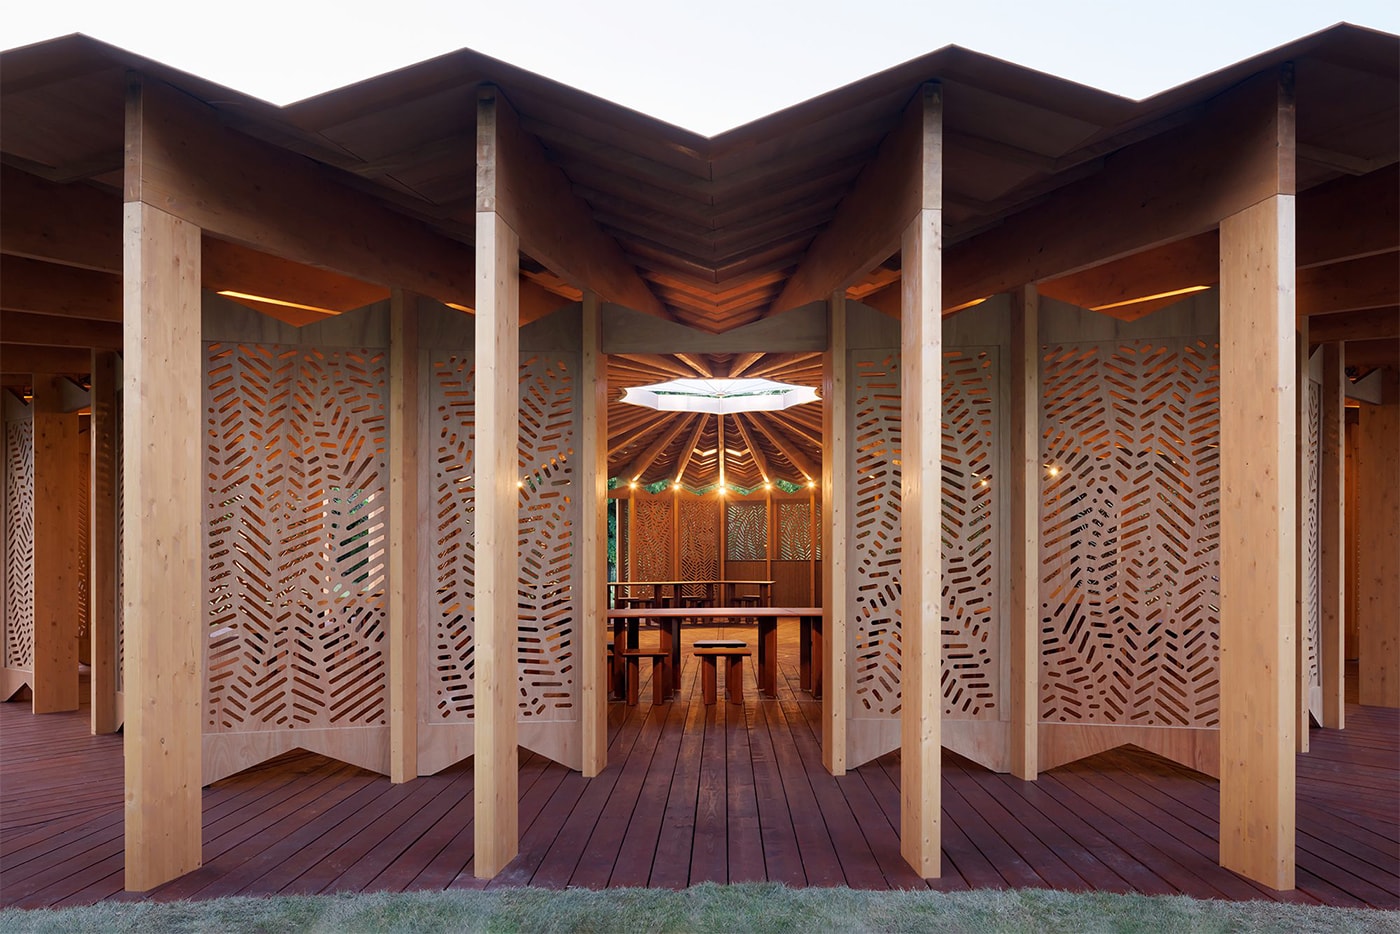 Lina Ghotmeh's Serpentine Pavilion Takes Design Cues from Community Buildings